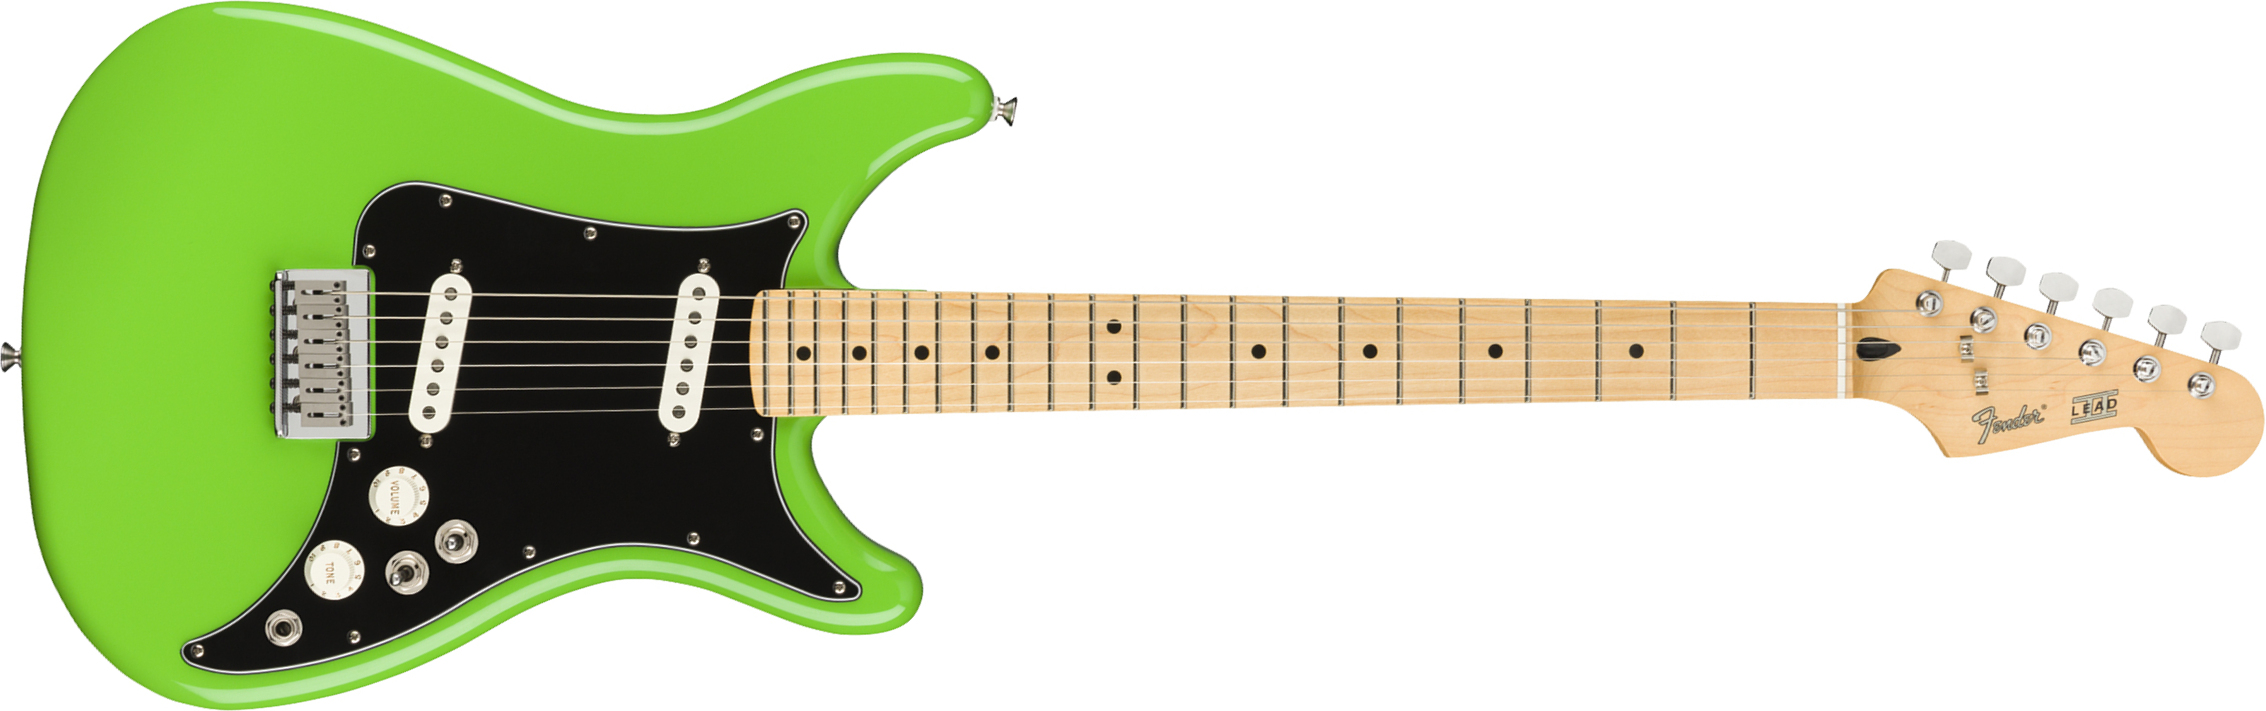 Fender Lead Ii Player Mex Ss Ht Mn - Neon Green - Guitare Électrique Forme Str - Main picture